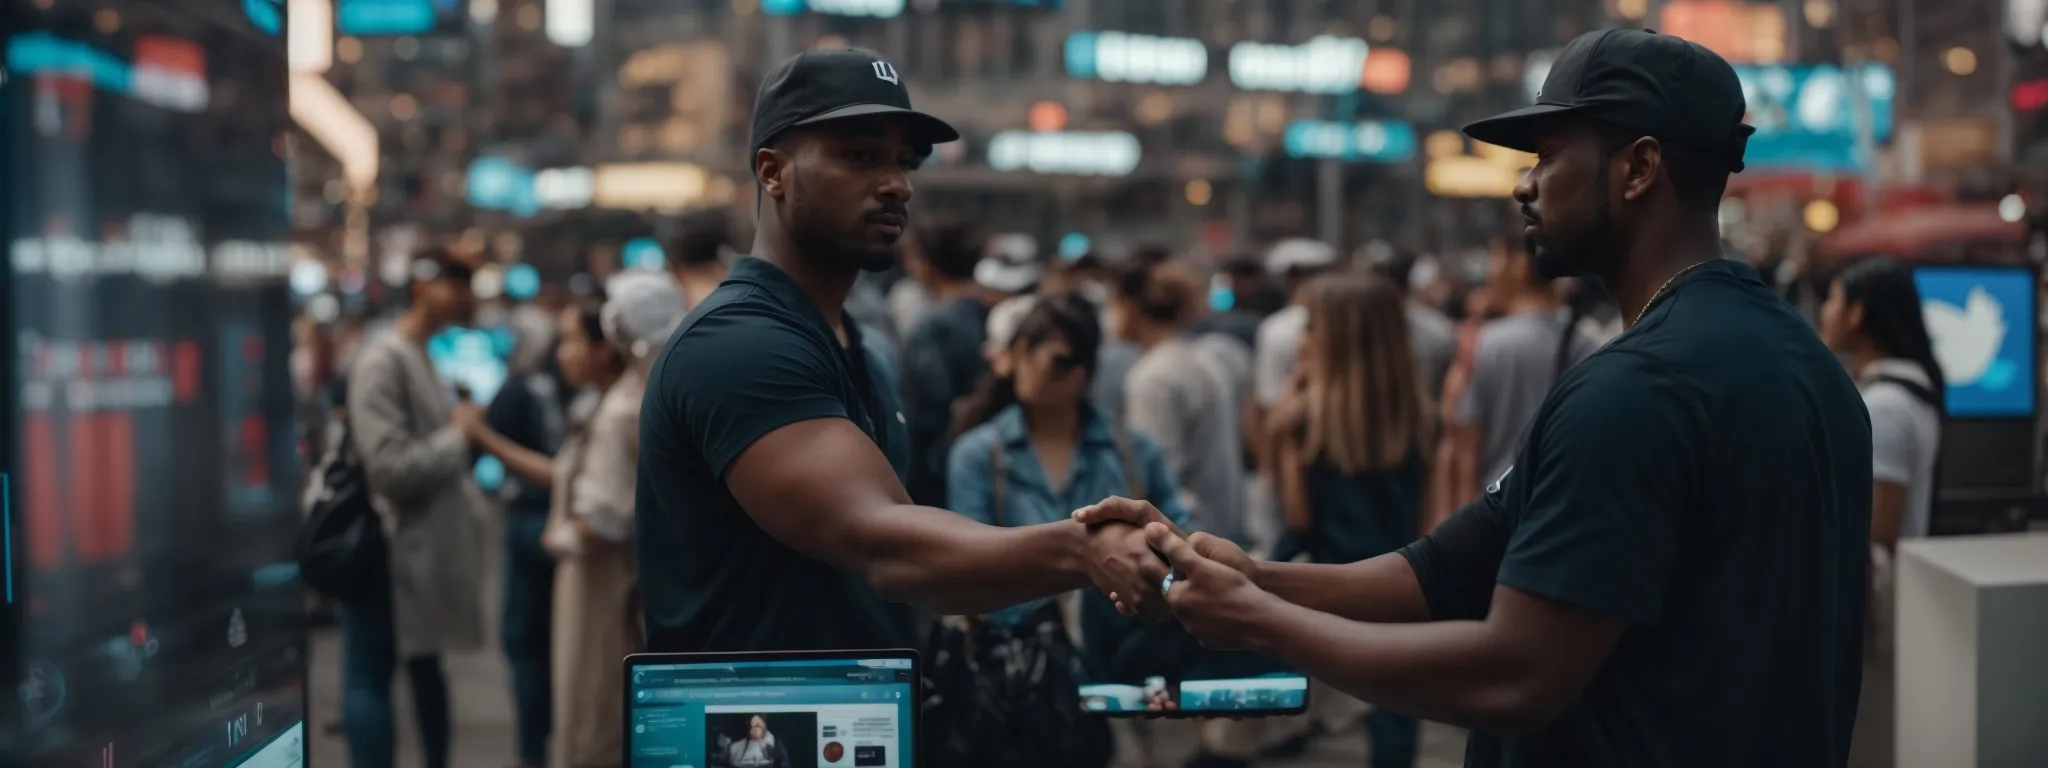 a marketer shaking hands with a prominent social media influencer against a backdrop of bustling digital screens displaying various social media platforms.